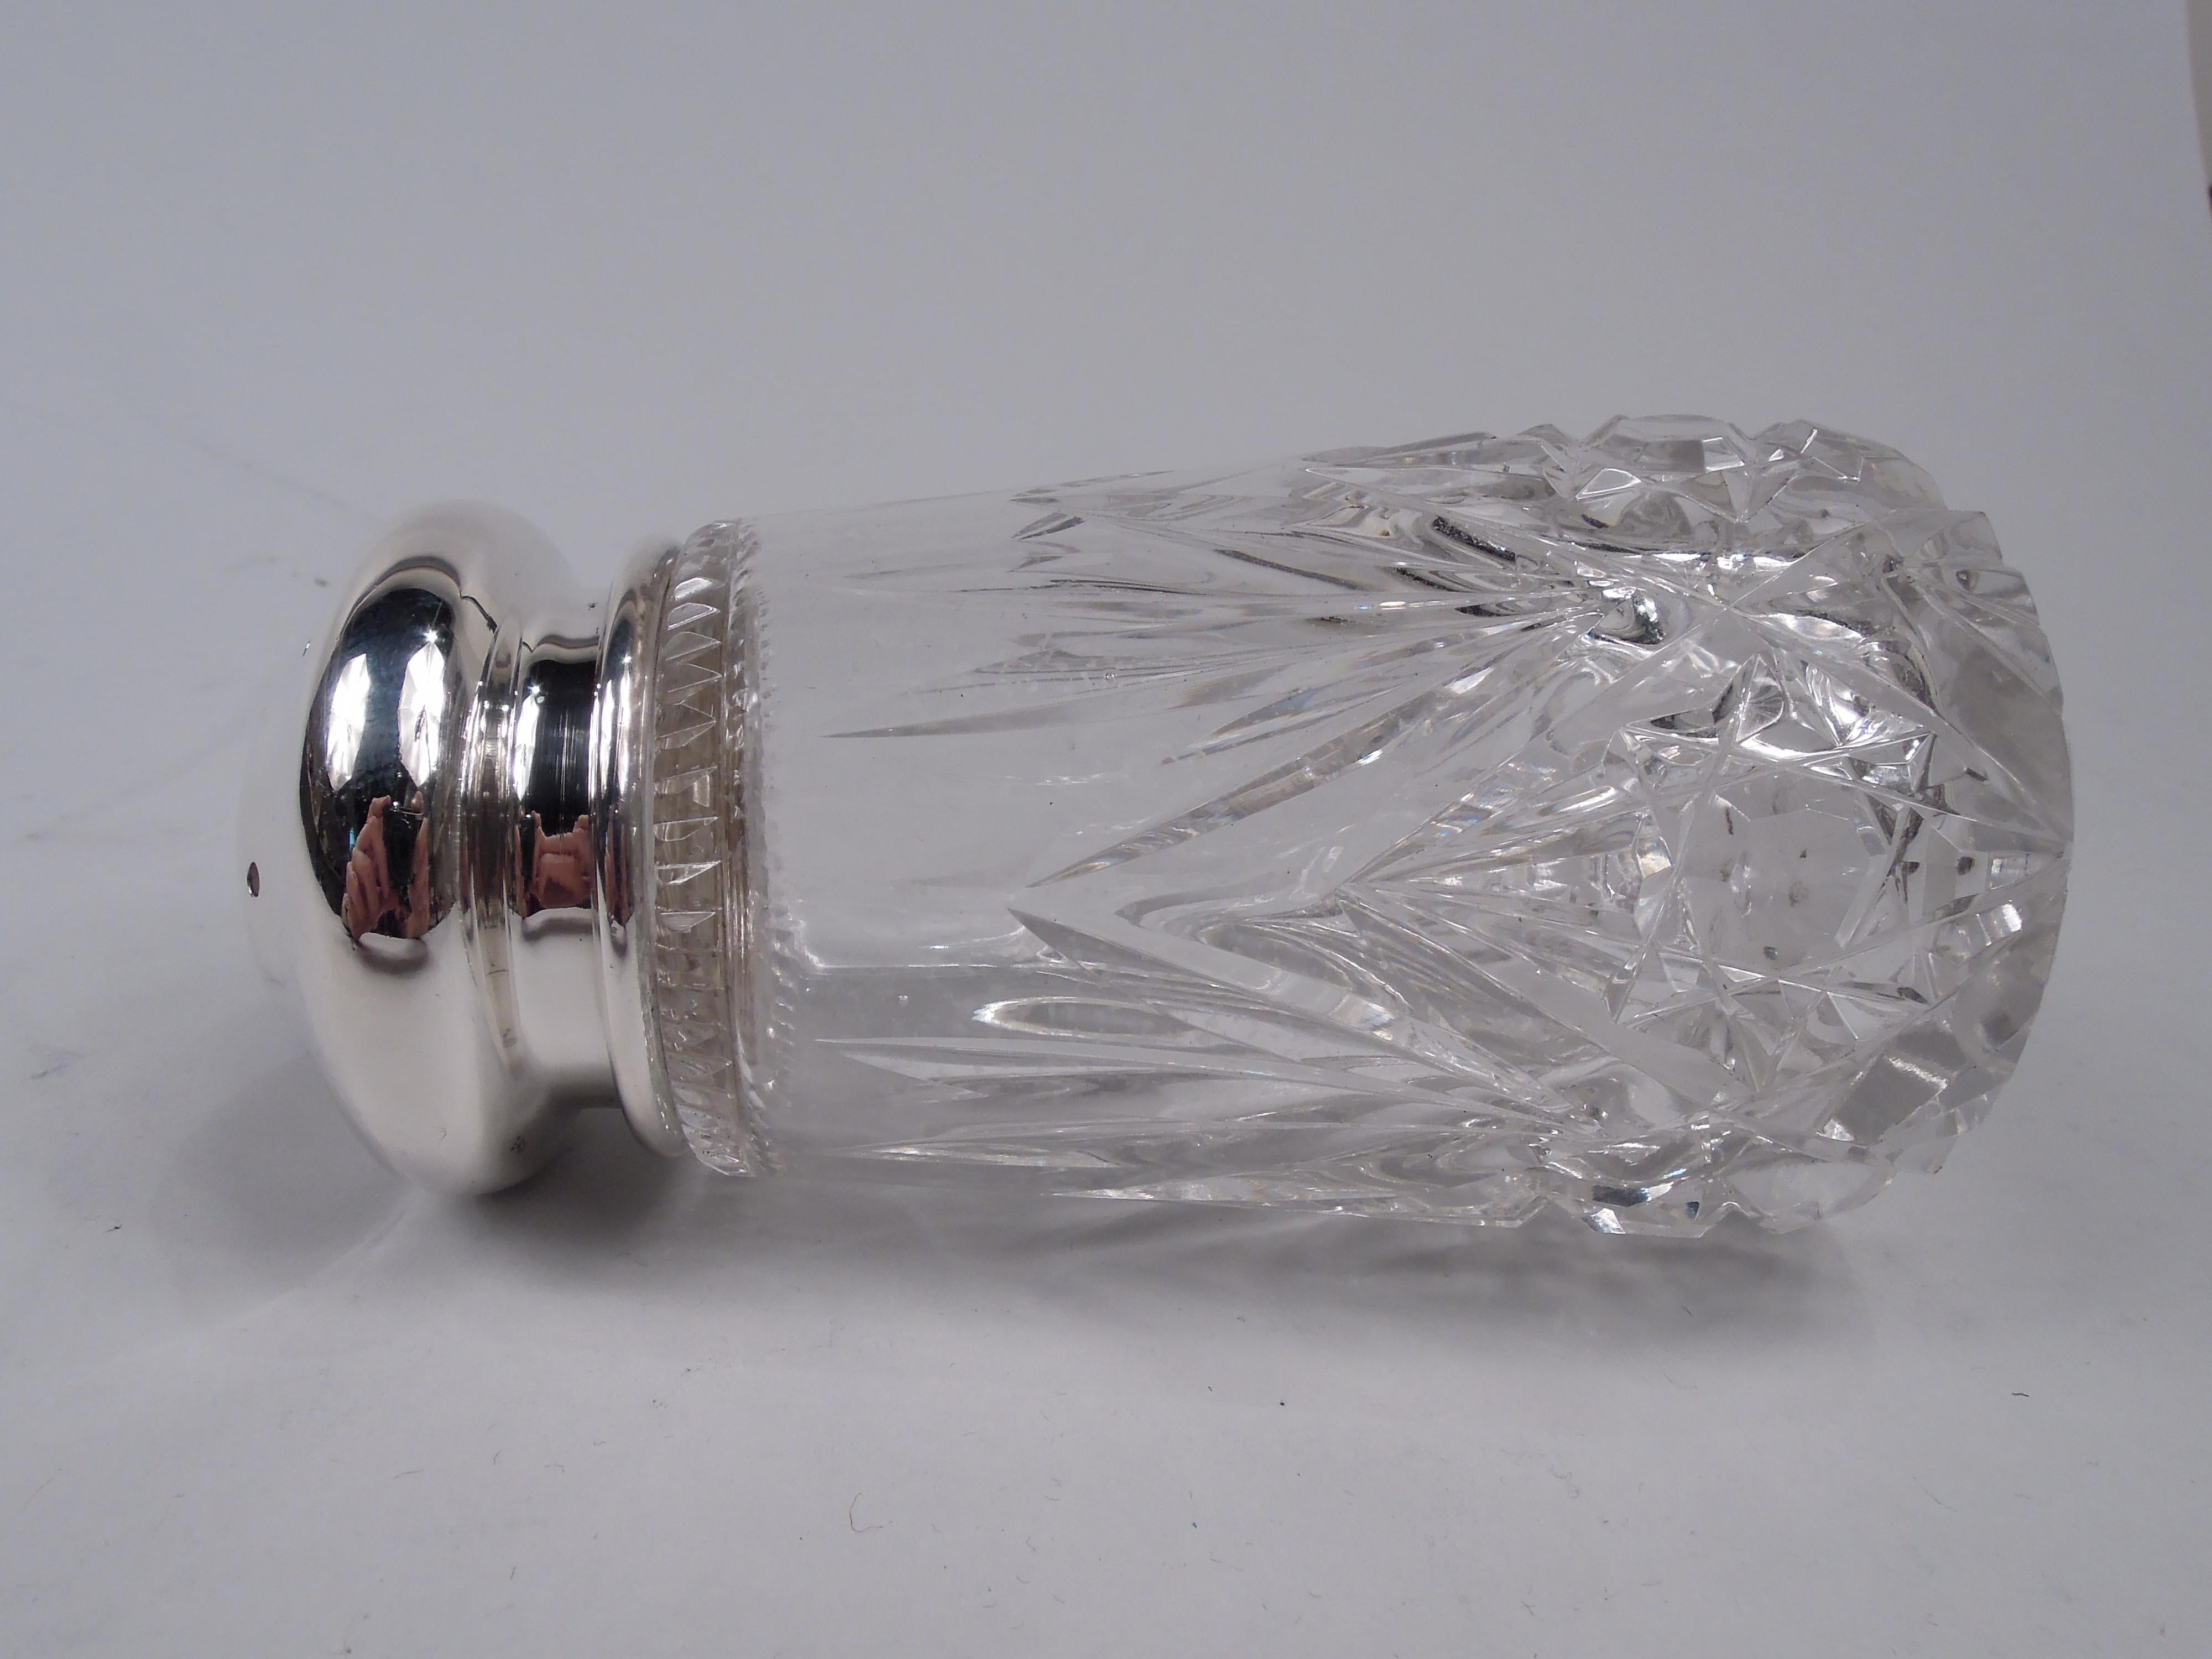 Edwardian glass sugar caster with sterling silver cover. Made by the Merrill Shops in New York, ca 1910. Bowl has upward tapering sides with cut ferns and stars, and leaf mouth rim. Cover domed and pierced. Fully marked including maker’s stamp and